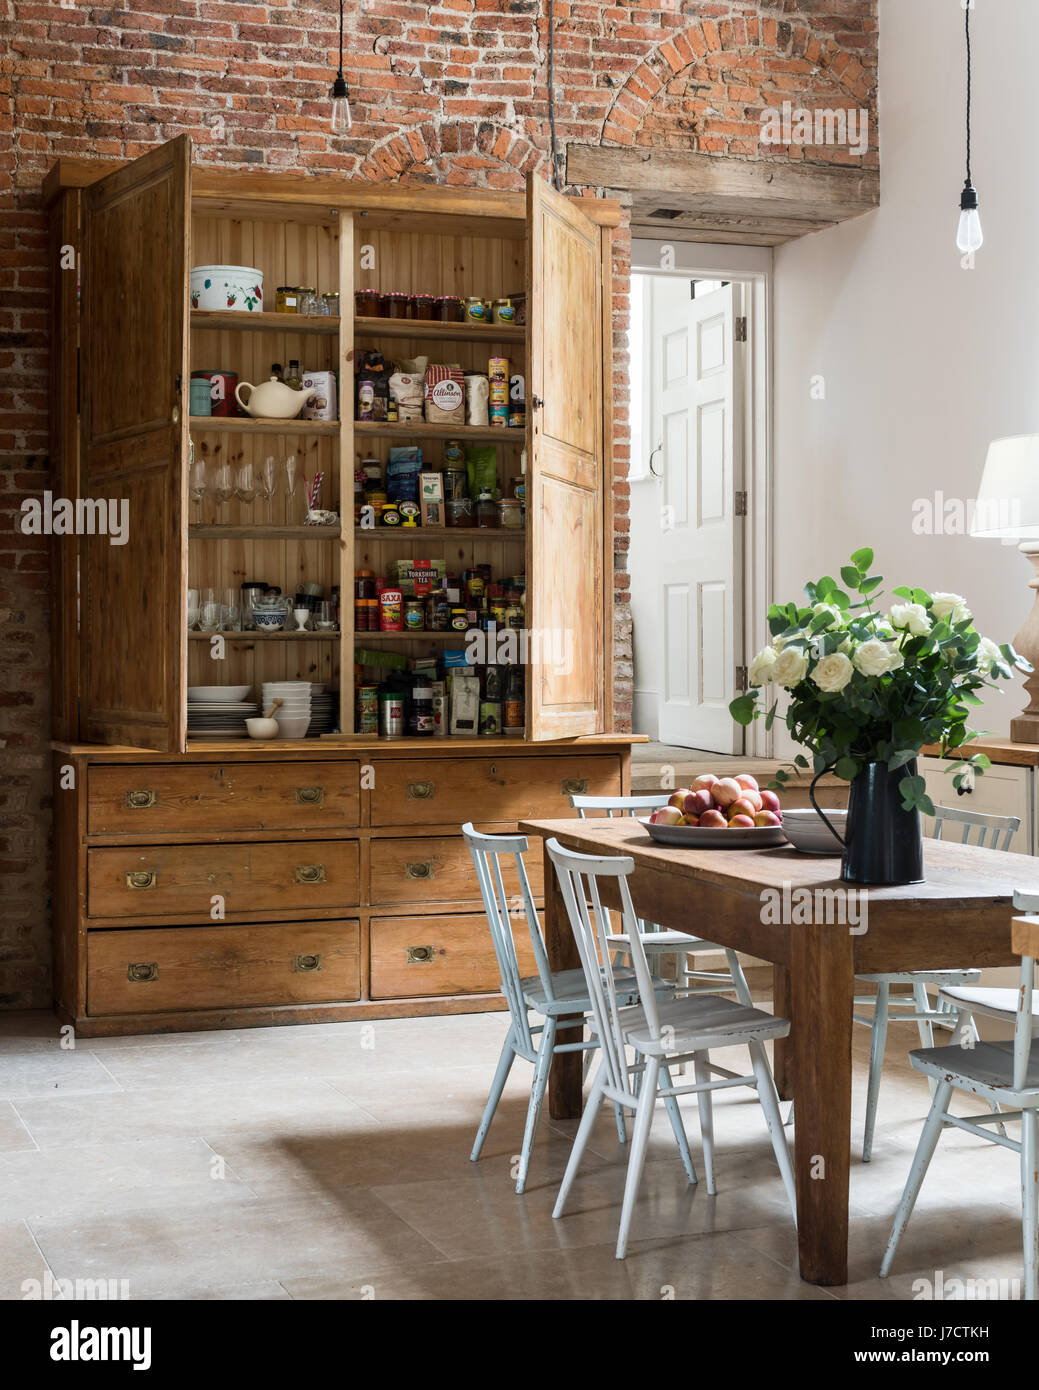 Large pantry cupboard in spacious kitchen with exposed brick wall and farmhouse wooden table Stock Photo